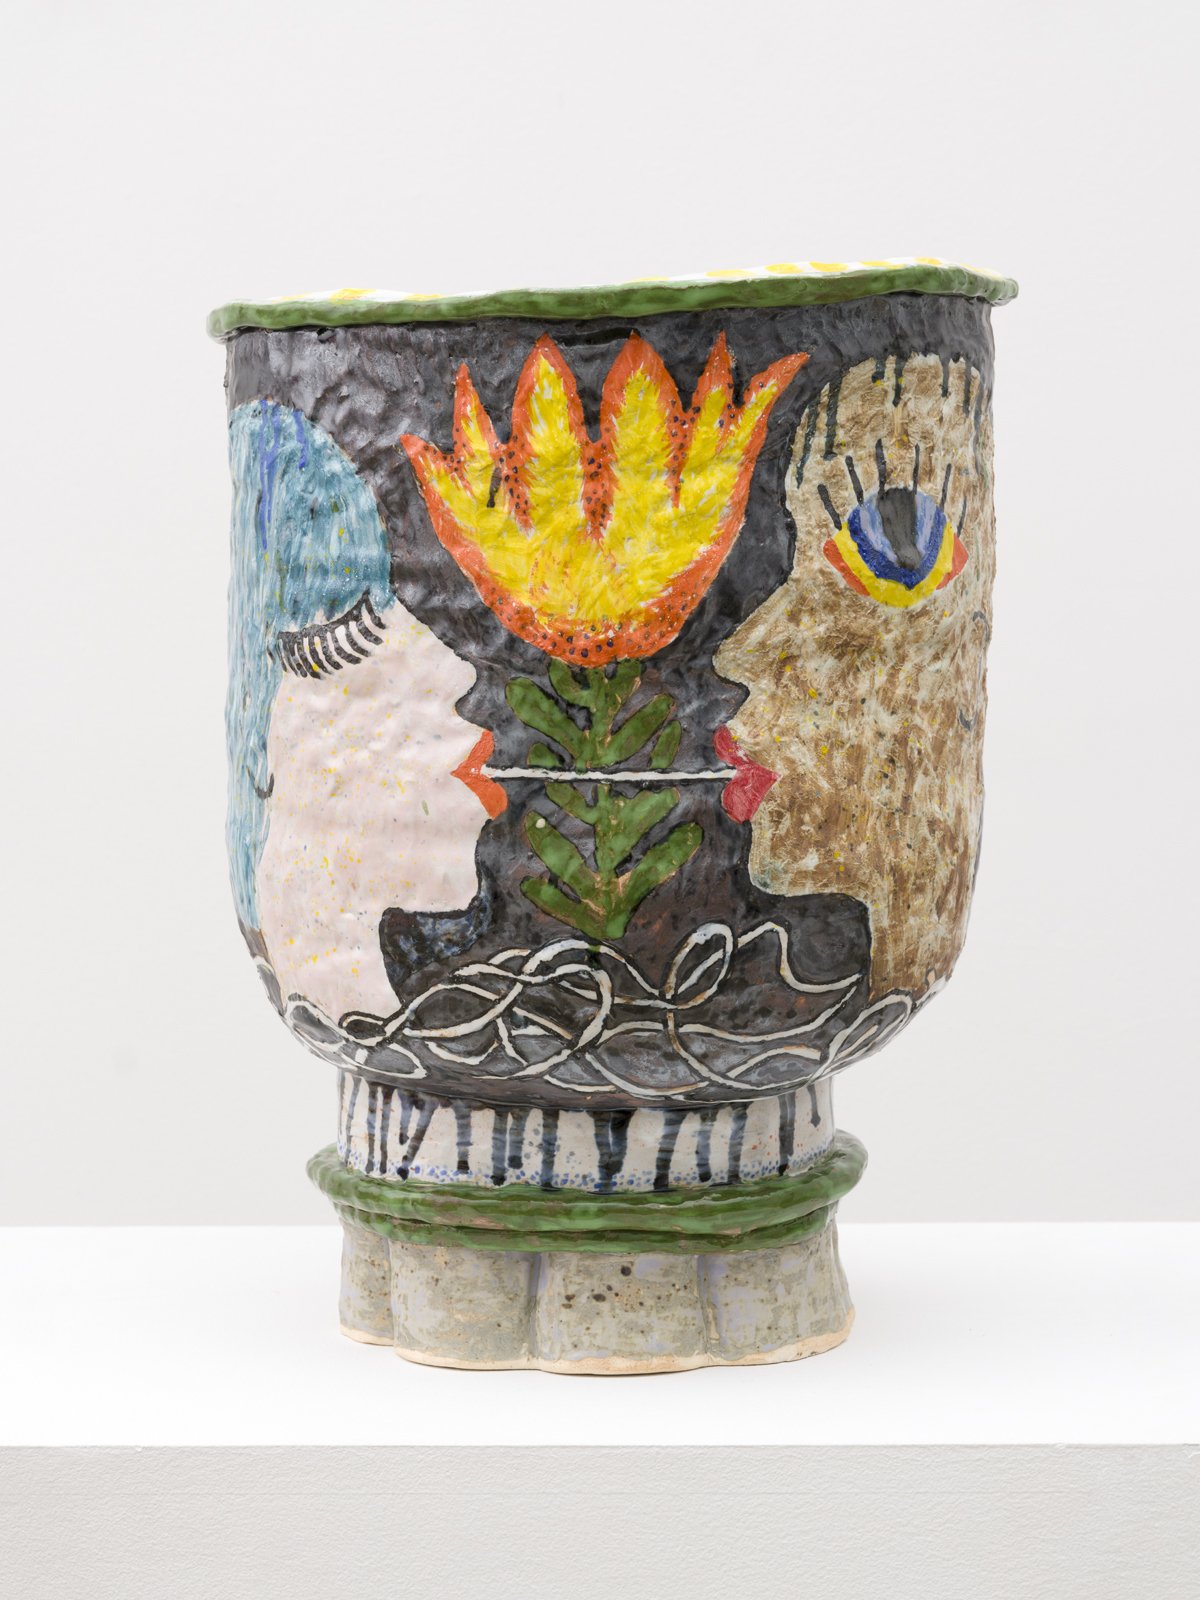  Jennifer King  It never could have happened without you, 2023  Glazed Ceramic  18 x 12½ x 12½ in. 